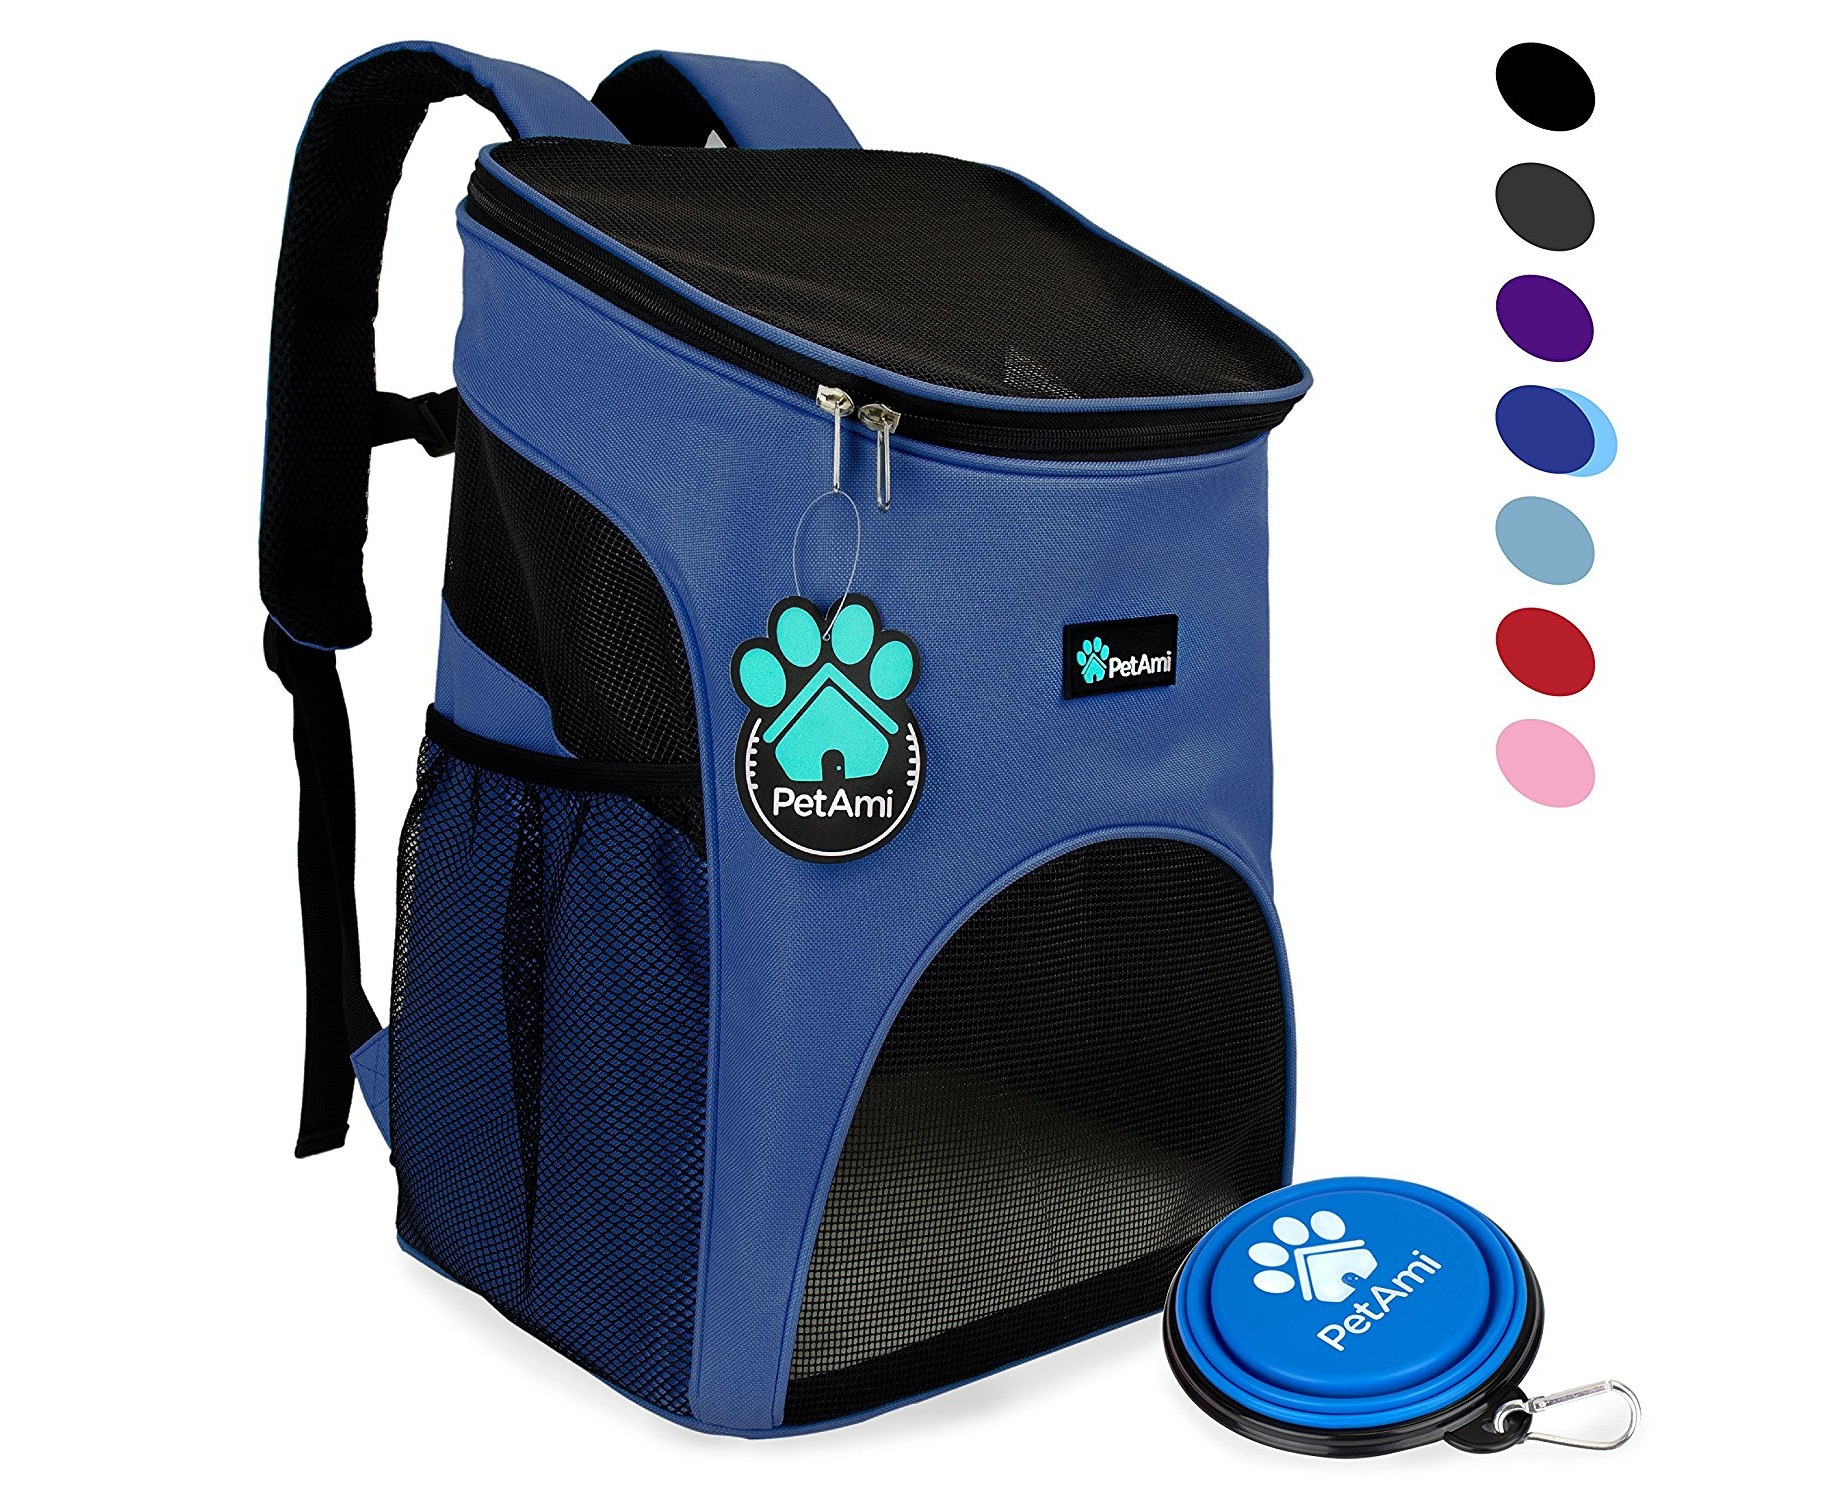 PetAmi Premium Pet Carrier Backpack for Small Cats and Dogs Ventilated Design Buckle Support Designed for Travel Safety Strap Hiking & Outdoor Use 